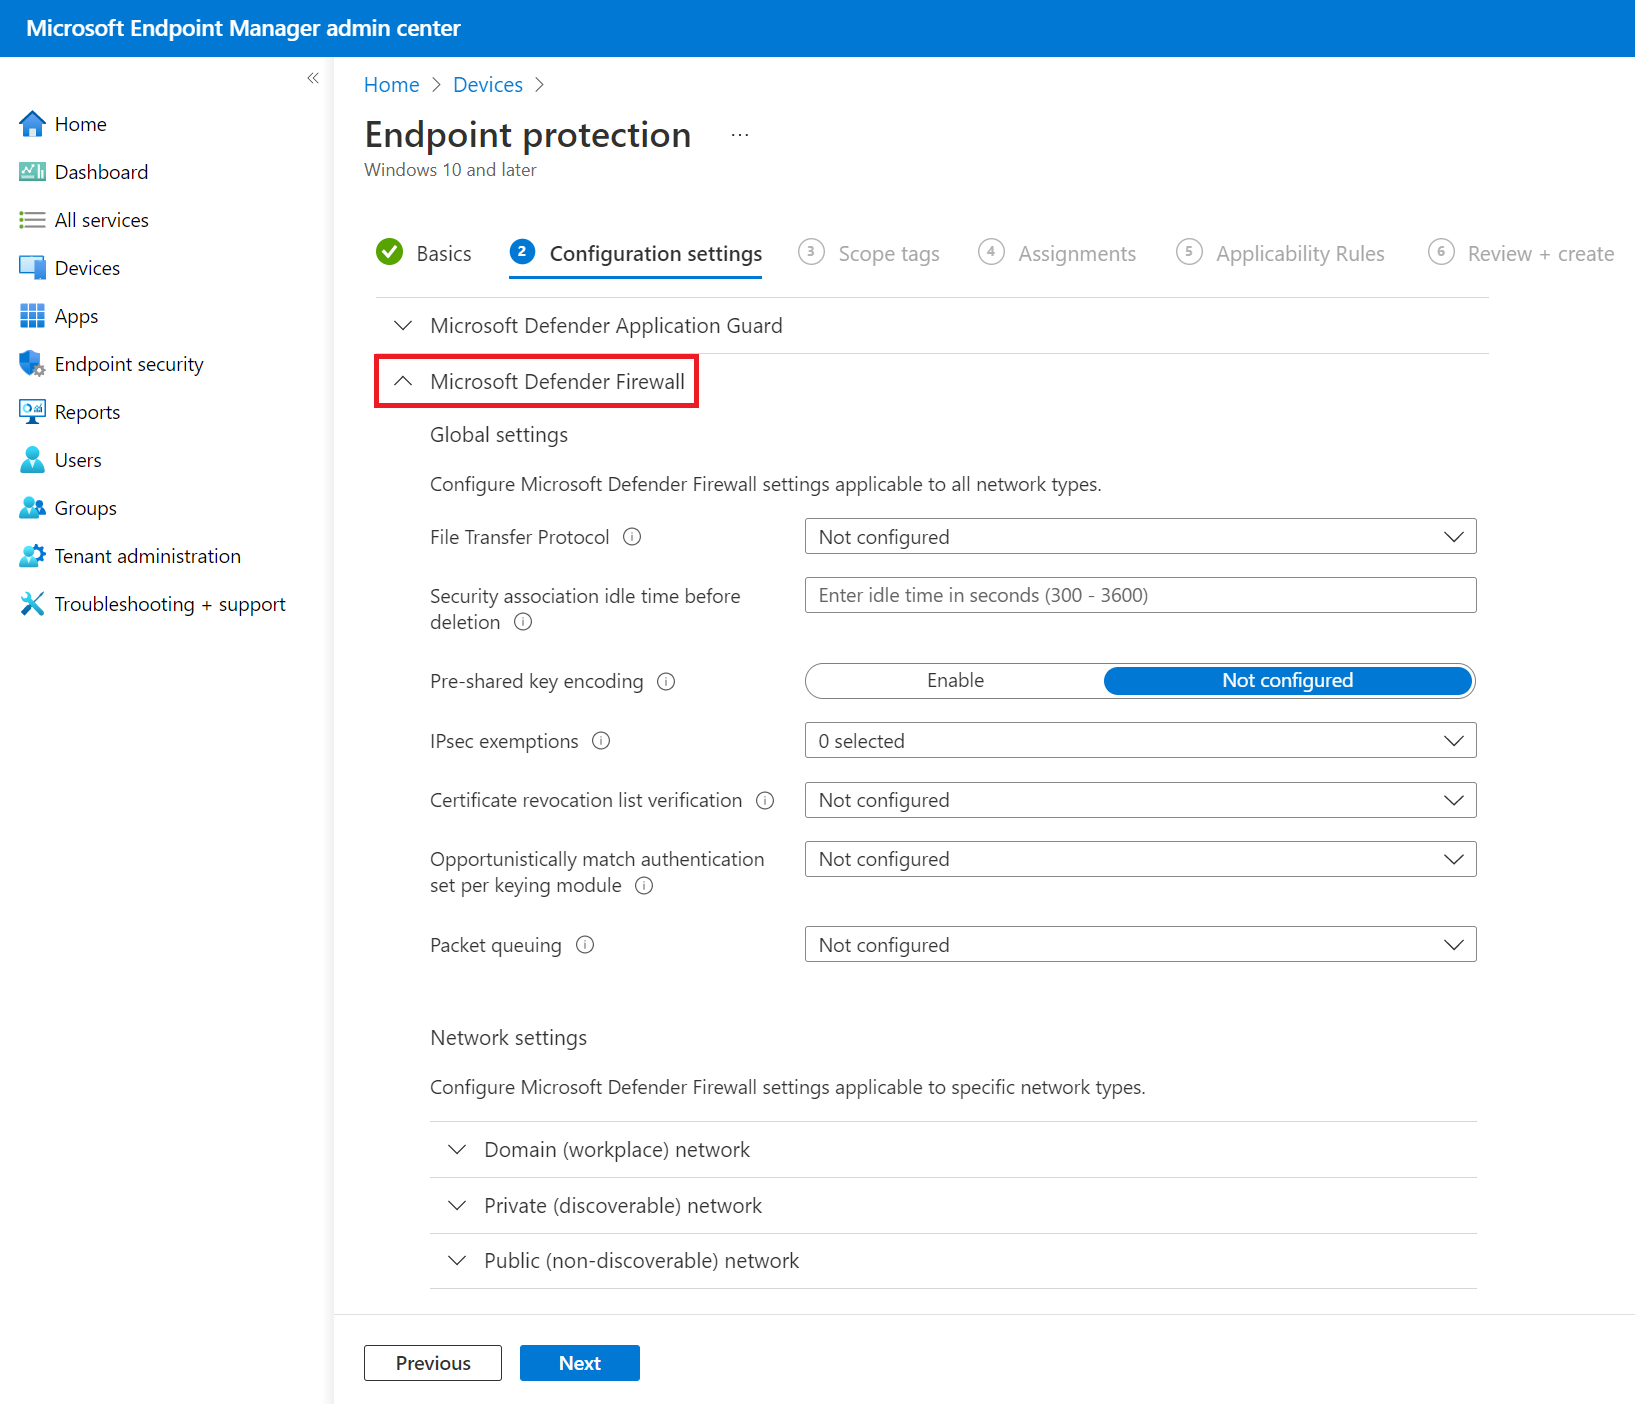 Example of a Windows Defender Firewall policy in Microsoft Intune and the Intune admin center.